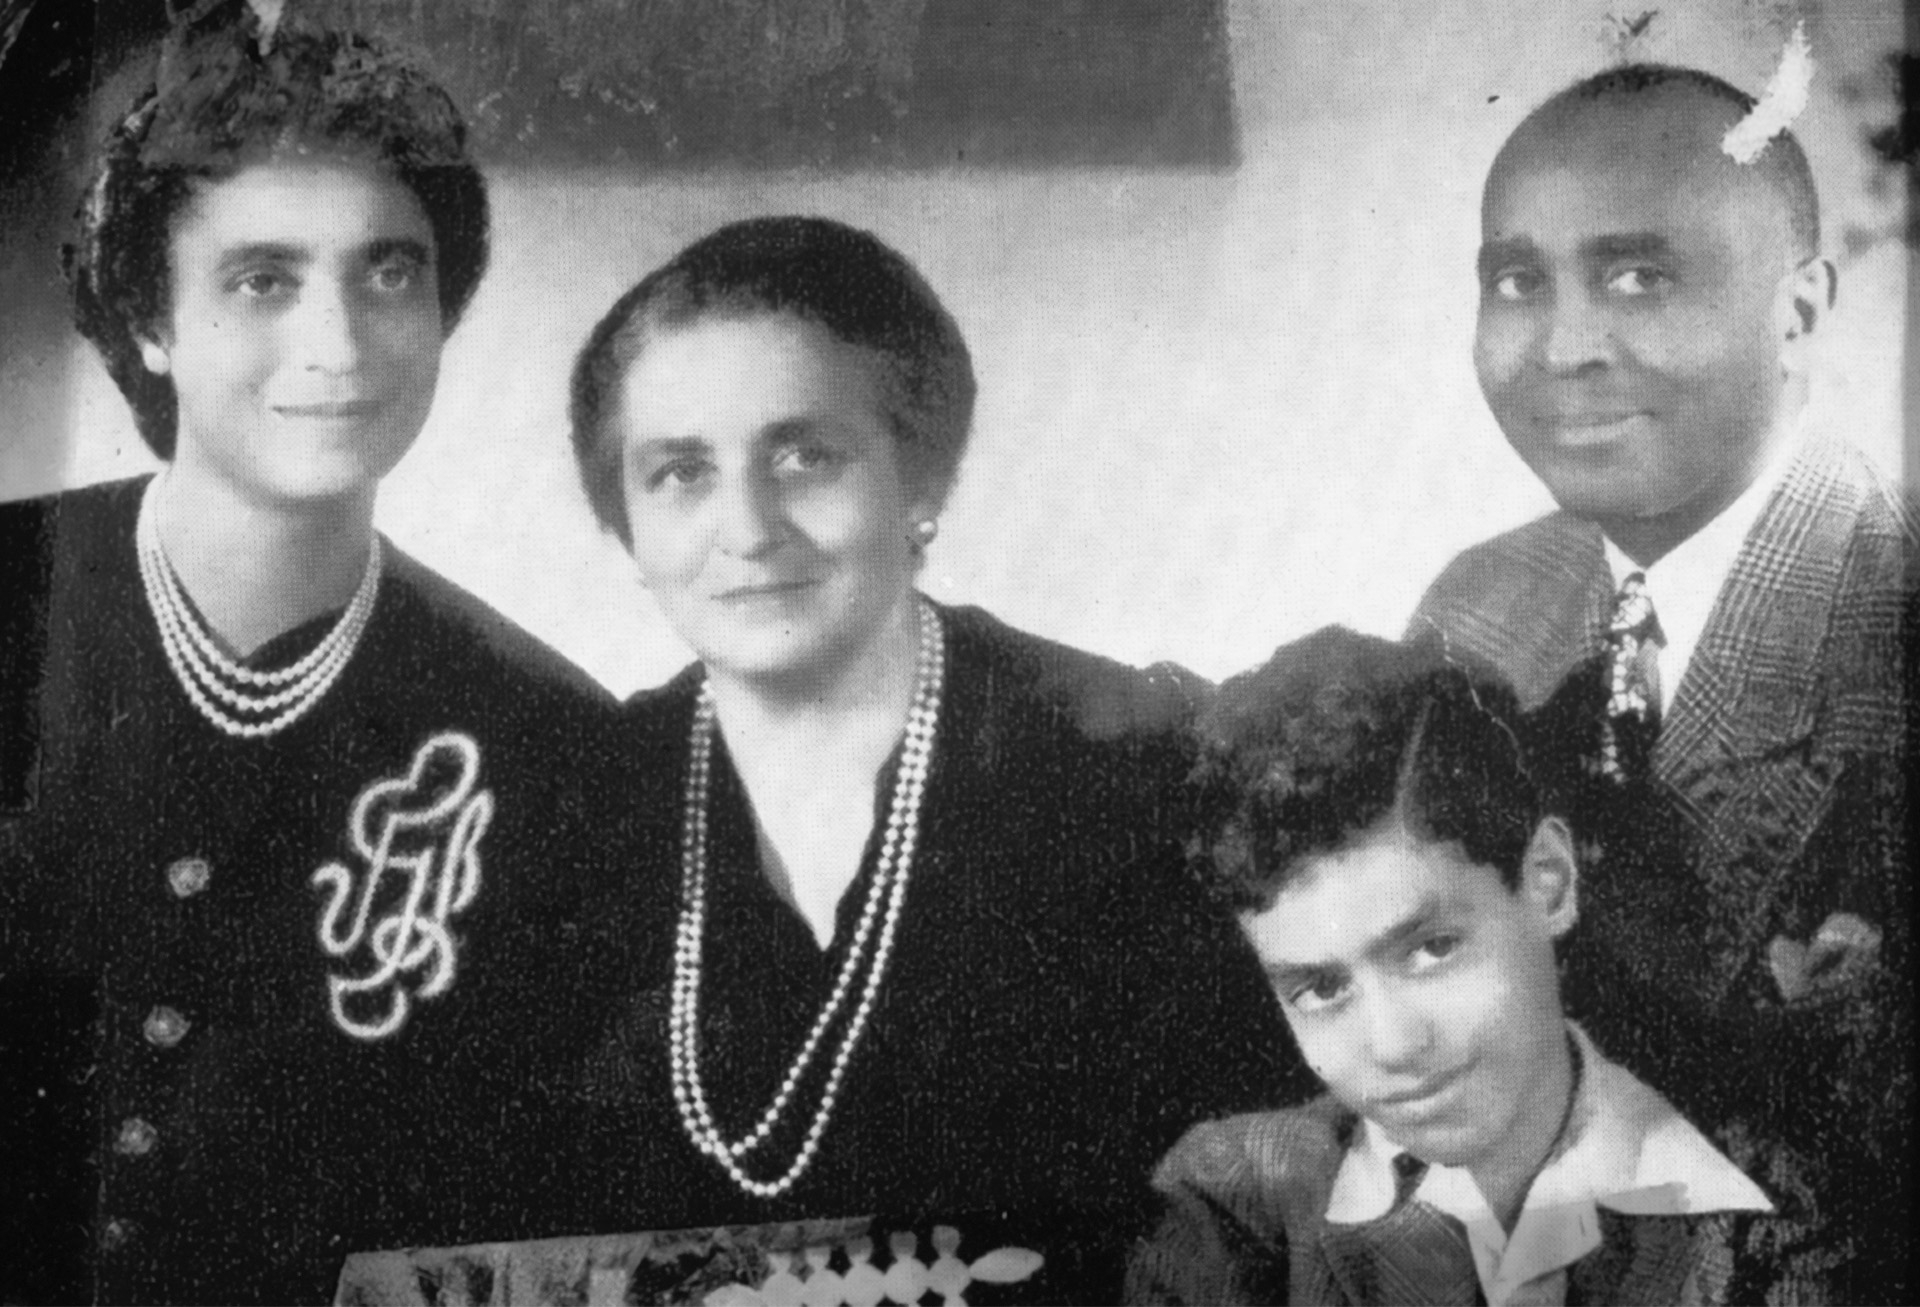 Faith Jefferson Jones, left, was one of two documented Black graduates of Oak Park River Forest High School in 1923.She is shown here in an undated photo, likely taken in the mid-1930s with her son Dewey and her parents Frederick and Gertrude.